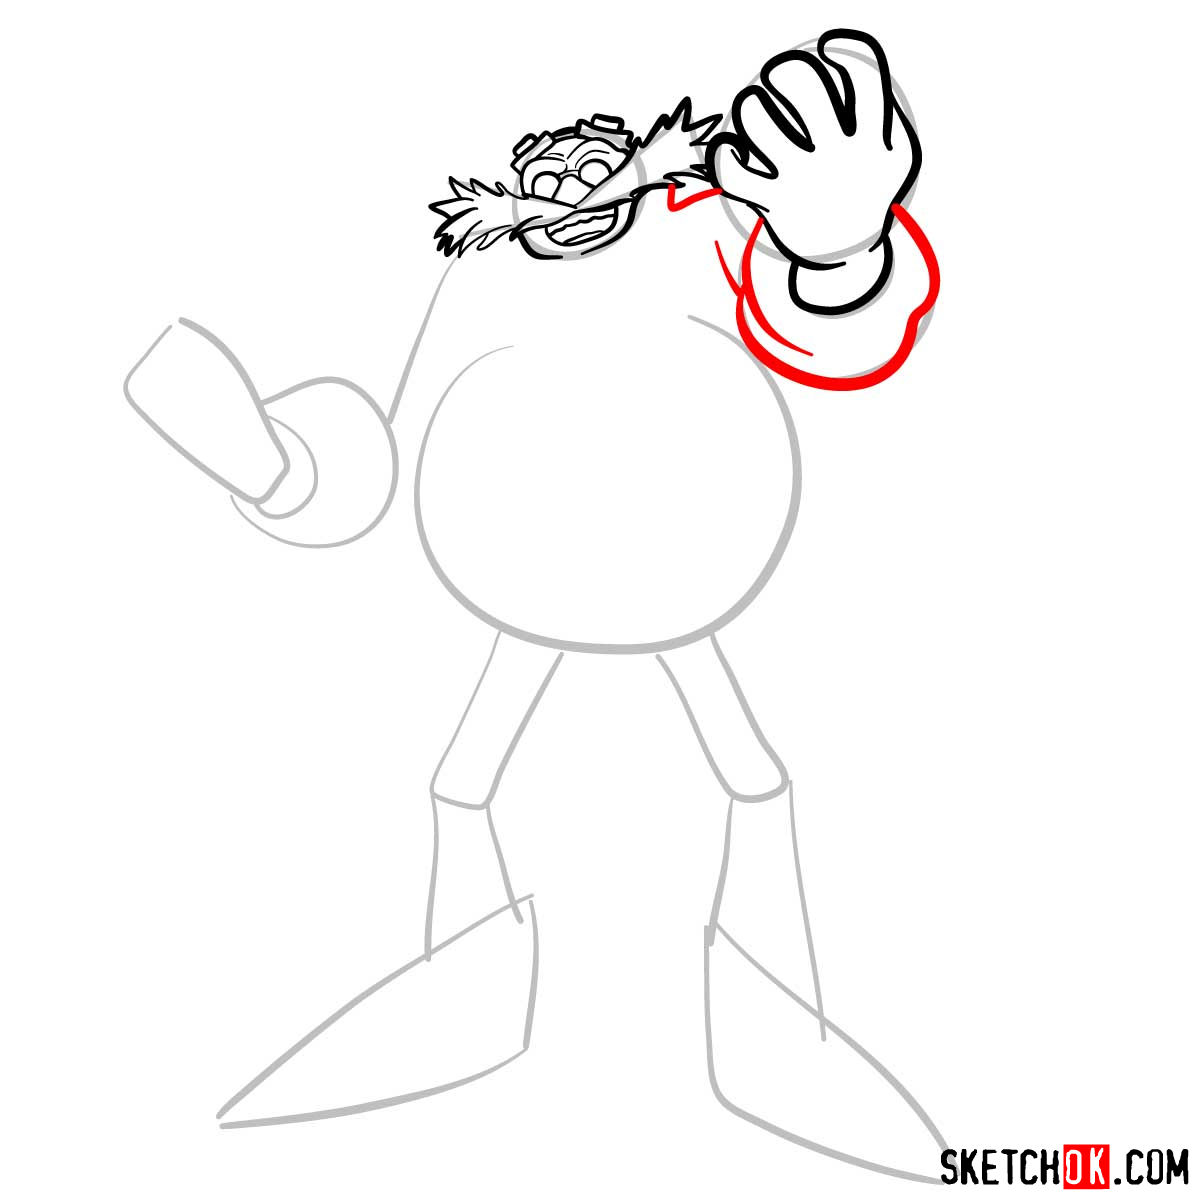 How to draw Dr. Robotnik (Eggman) from Sonic the Hedgehog - step 07